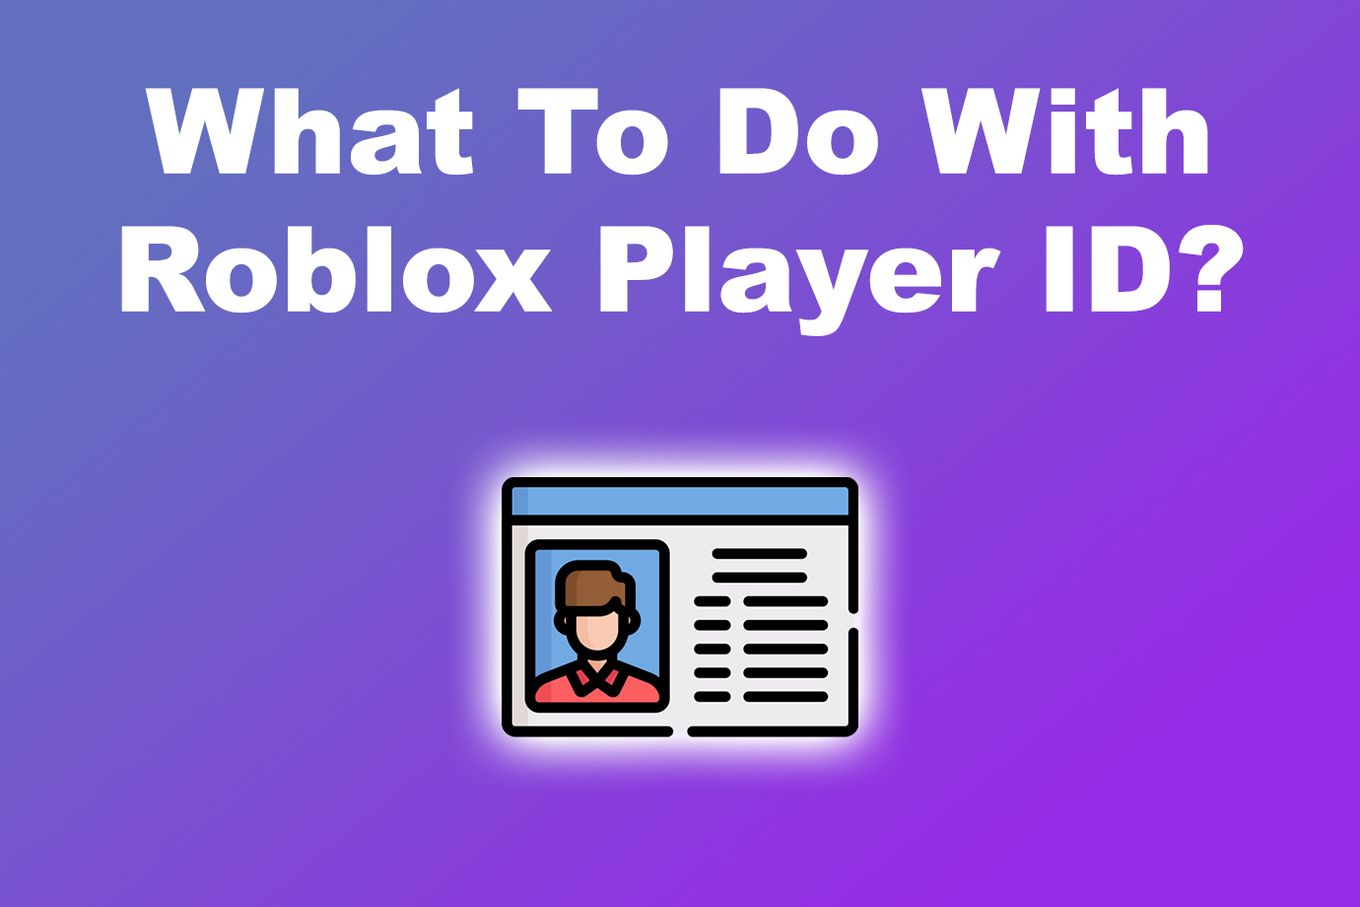 What To Do With Your Roblox Player ID